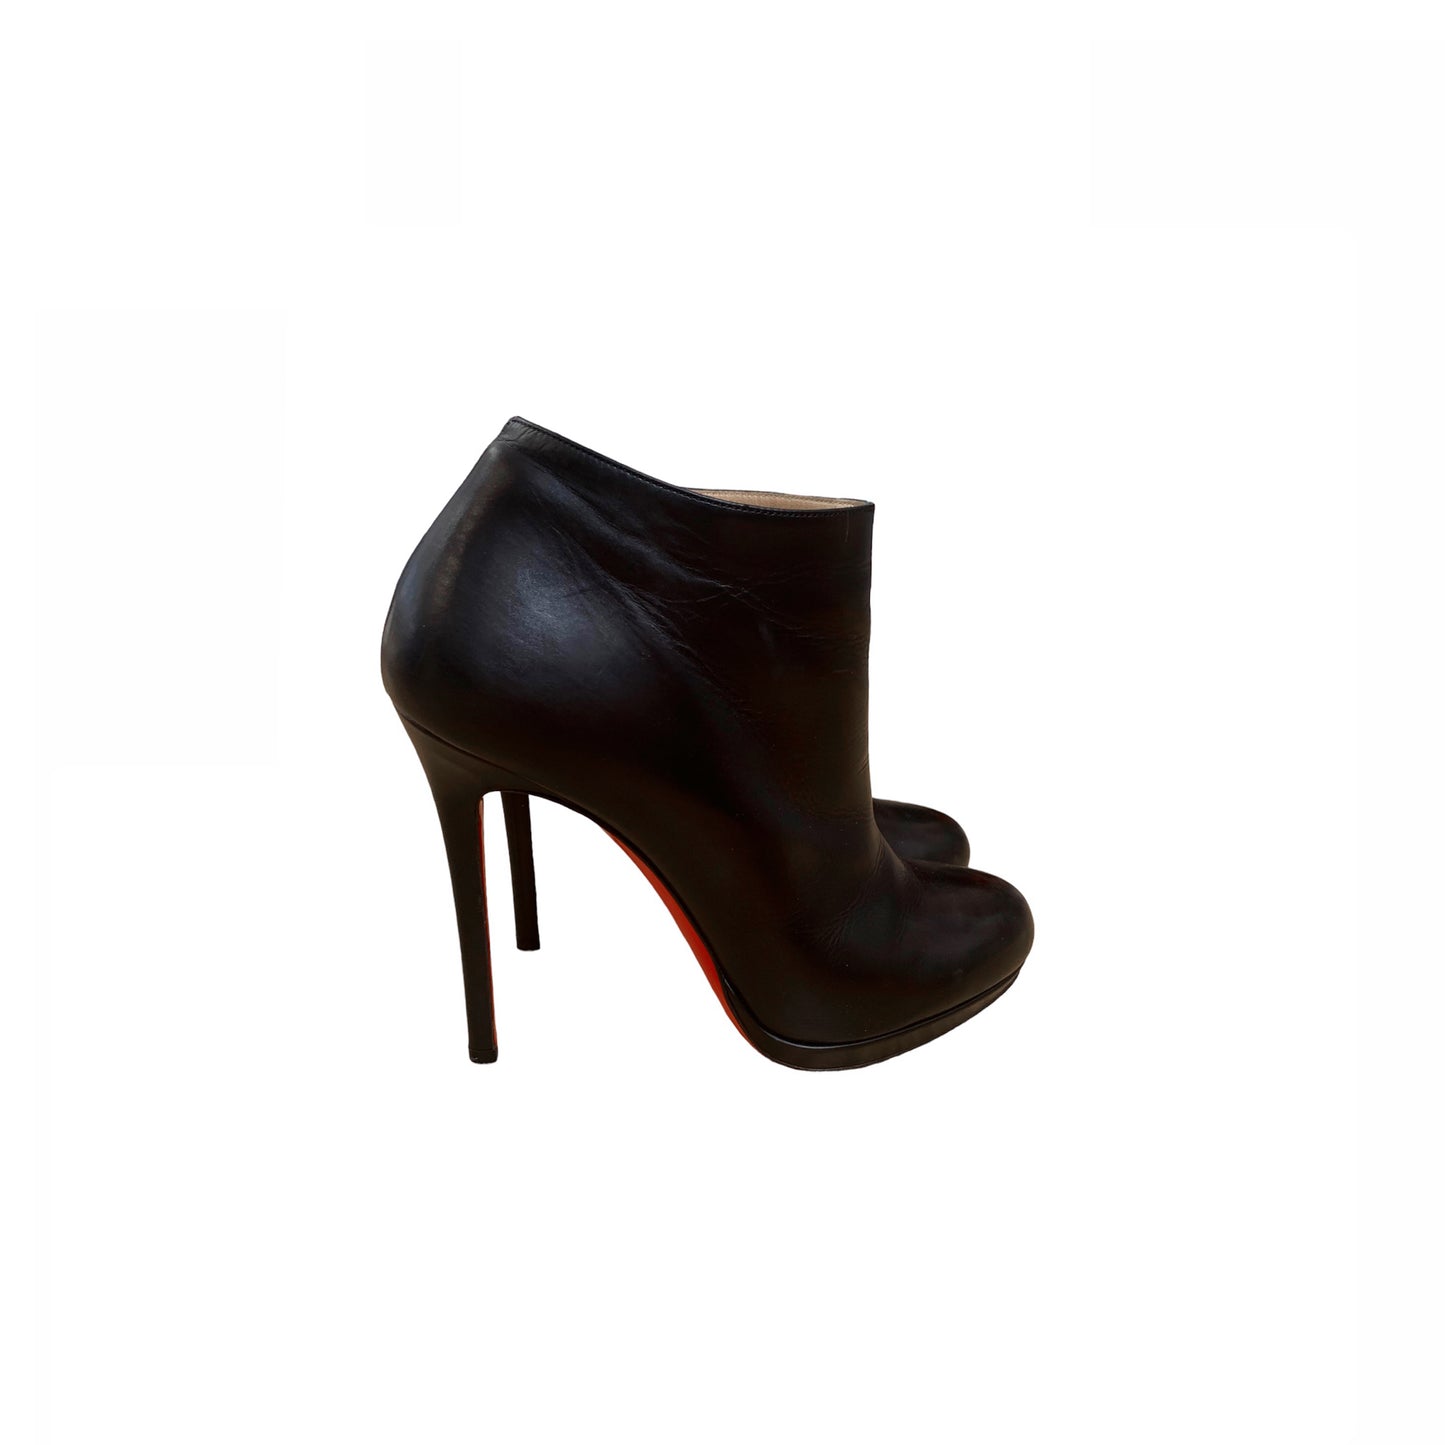 Christian Louboutin Black Heeled Ankle Boots